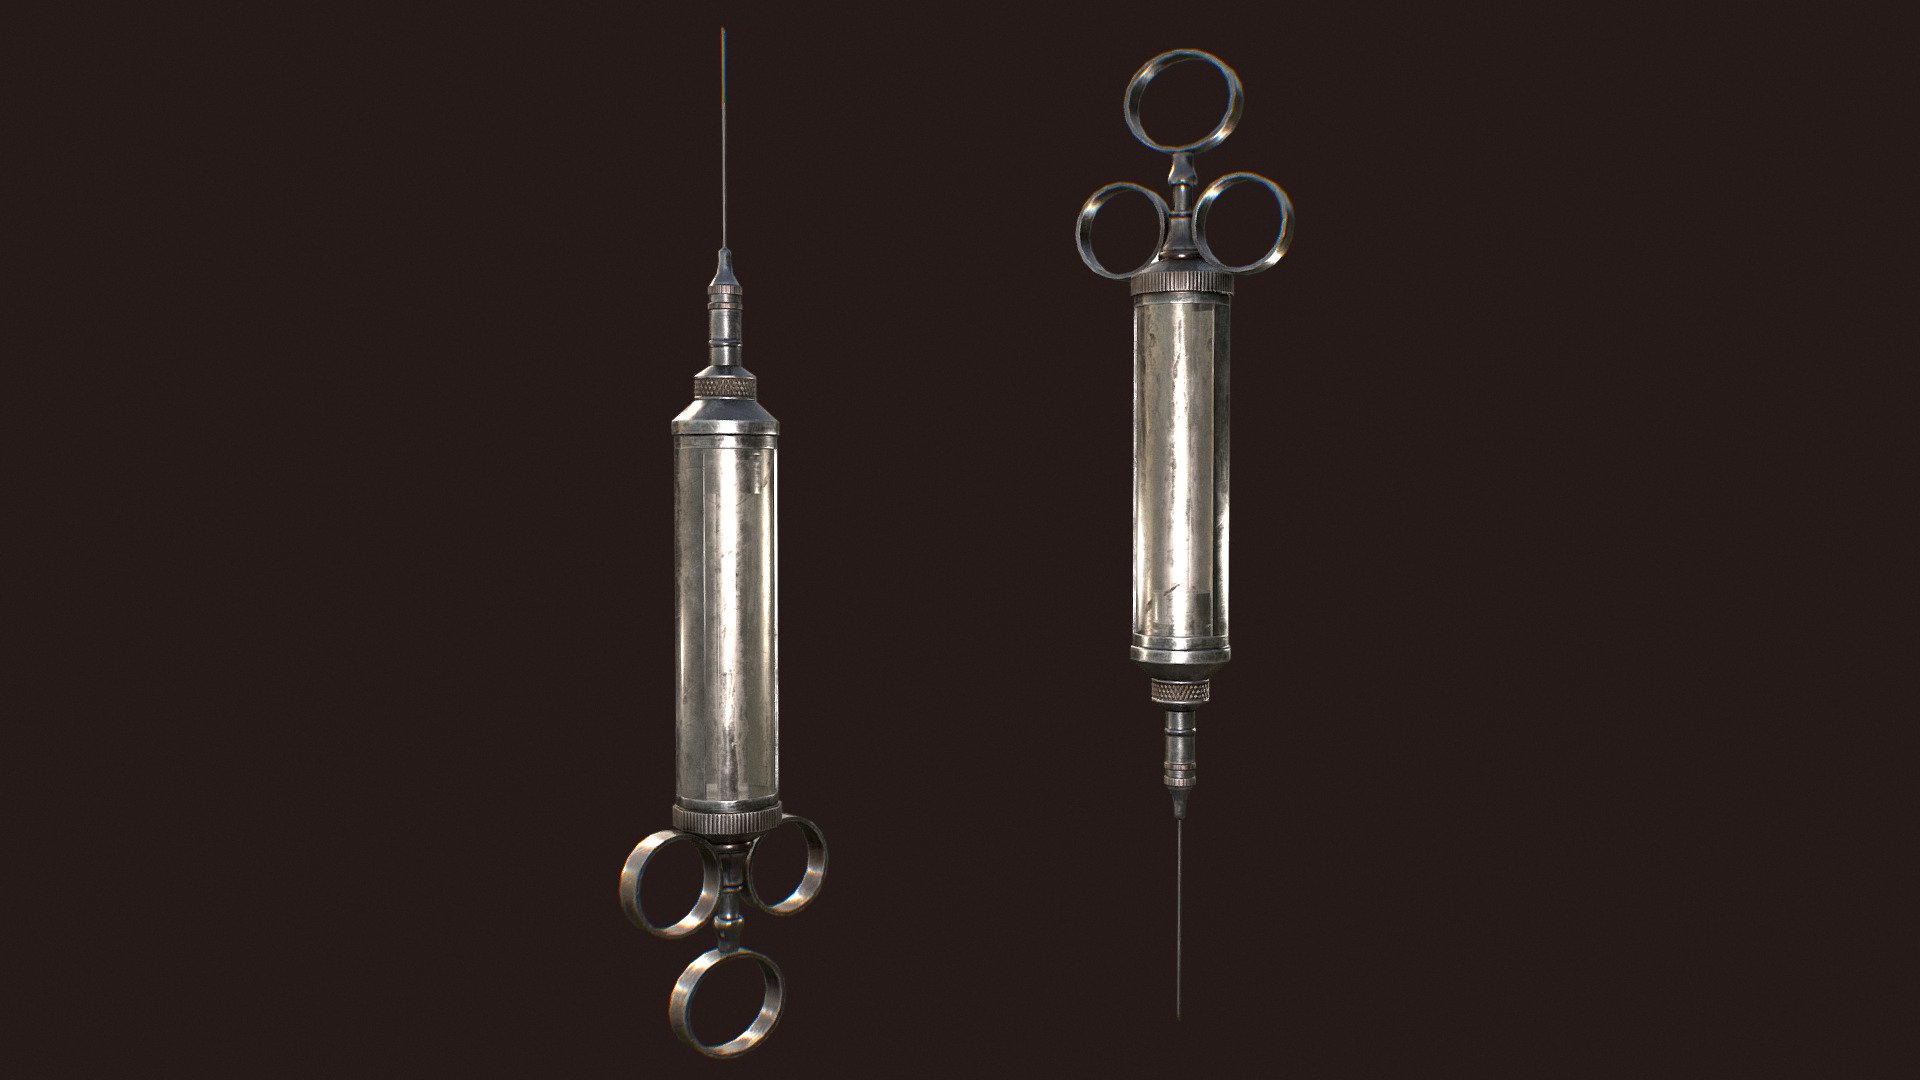 Antique Syringe it's a lowpoly game ready model with unwrapped UVs and PBR textures.

This model contains 2 separate objects (syringe barrel and plunger) and ready to be rigged. 

UVs: channel 1: overlapping; channel 2: non-overlapping (for baking lightmaps).

Formats: FBX, Obj.  Textures format: TGA. Textures resolution: 2048x2048px.

Textures set includes:




Metal_Roughness: BaseColor, Roughness, Metallic, Normal, Height, AO.

Unity 5 (Standart Metallic): AlbedoTransparency, AO, Normal, MetallicSmoothness

Unreal Engine 4: BaseColor, OcclusionRoughnessMetallic, Normal.



Artstation: https://www.artstation.com/tatianagladkaya

Instagram: https://www.instagram.com/t.gladkaya_ - Antique Syringe - 3D model by Tatiana Gladkaya (@tatiana_gladkaya) 3d model